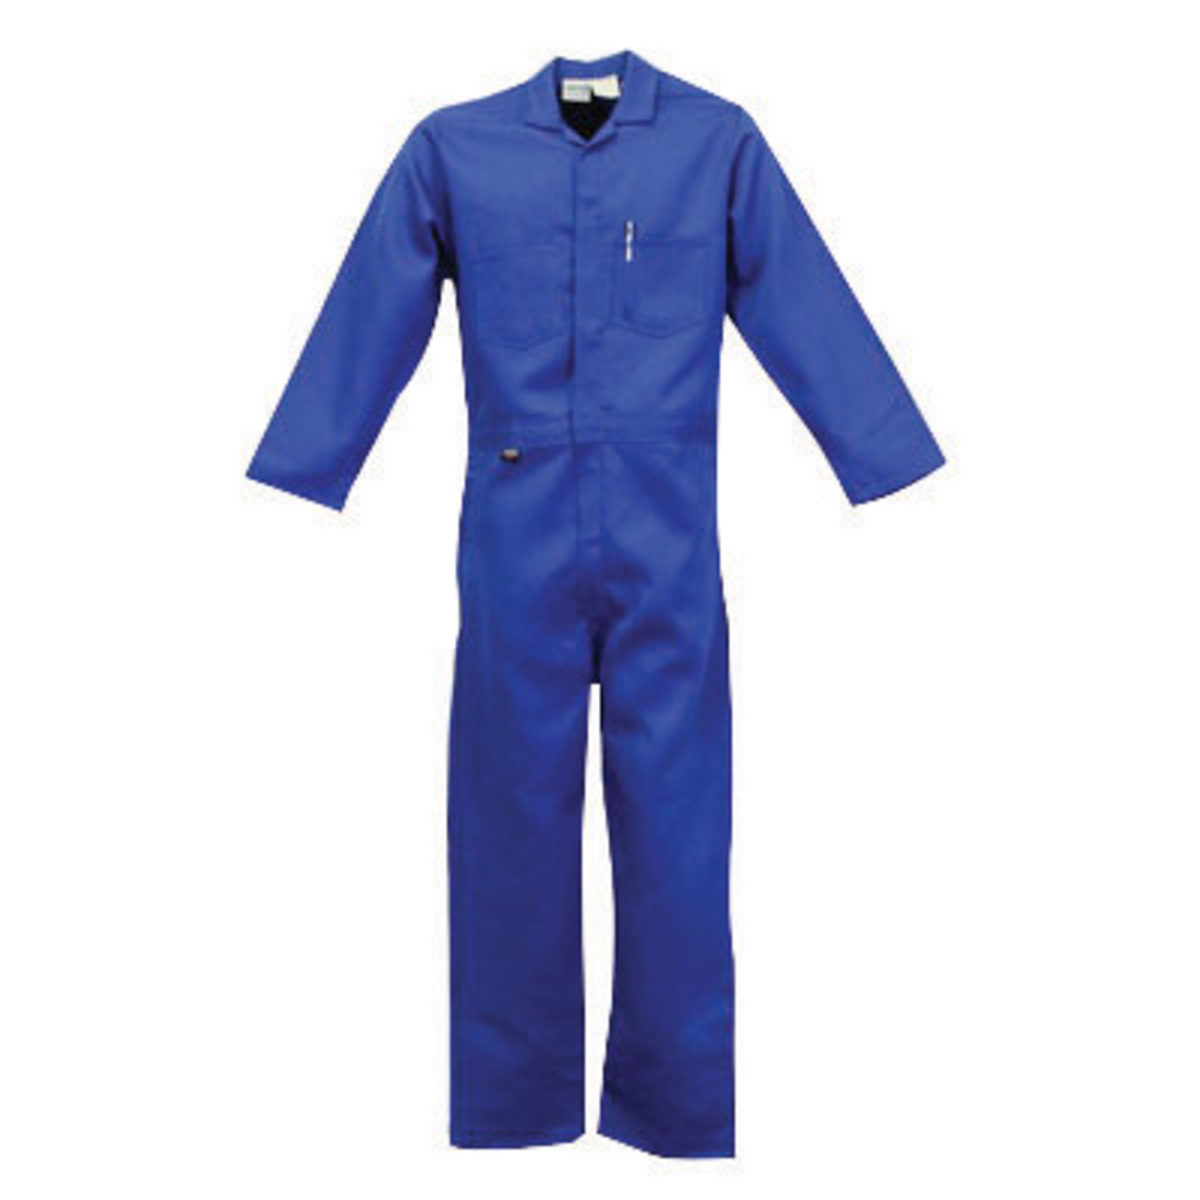 Stanco Safety Products™ Medium Royal Blue Indura® UltraSoft® Arc Rated Flame Resistant Coveralls With Front Zipper Closure